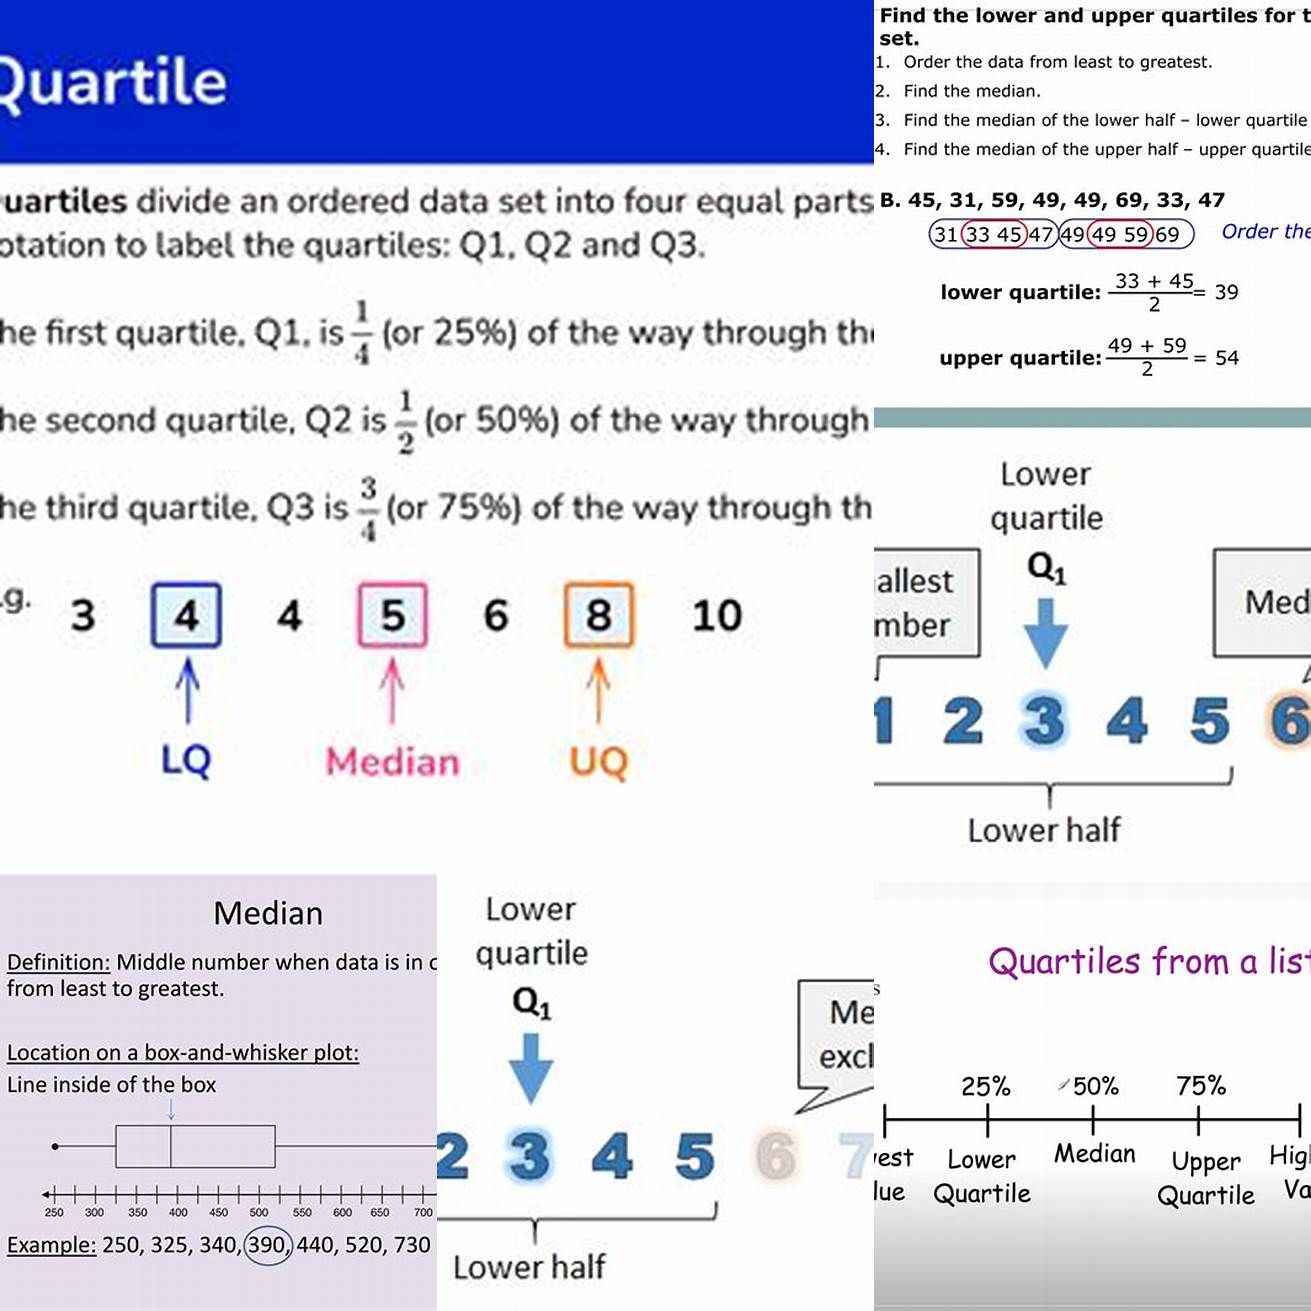 Find the lower quartile which is the median of the lower half of the data